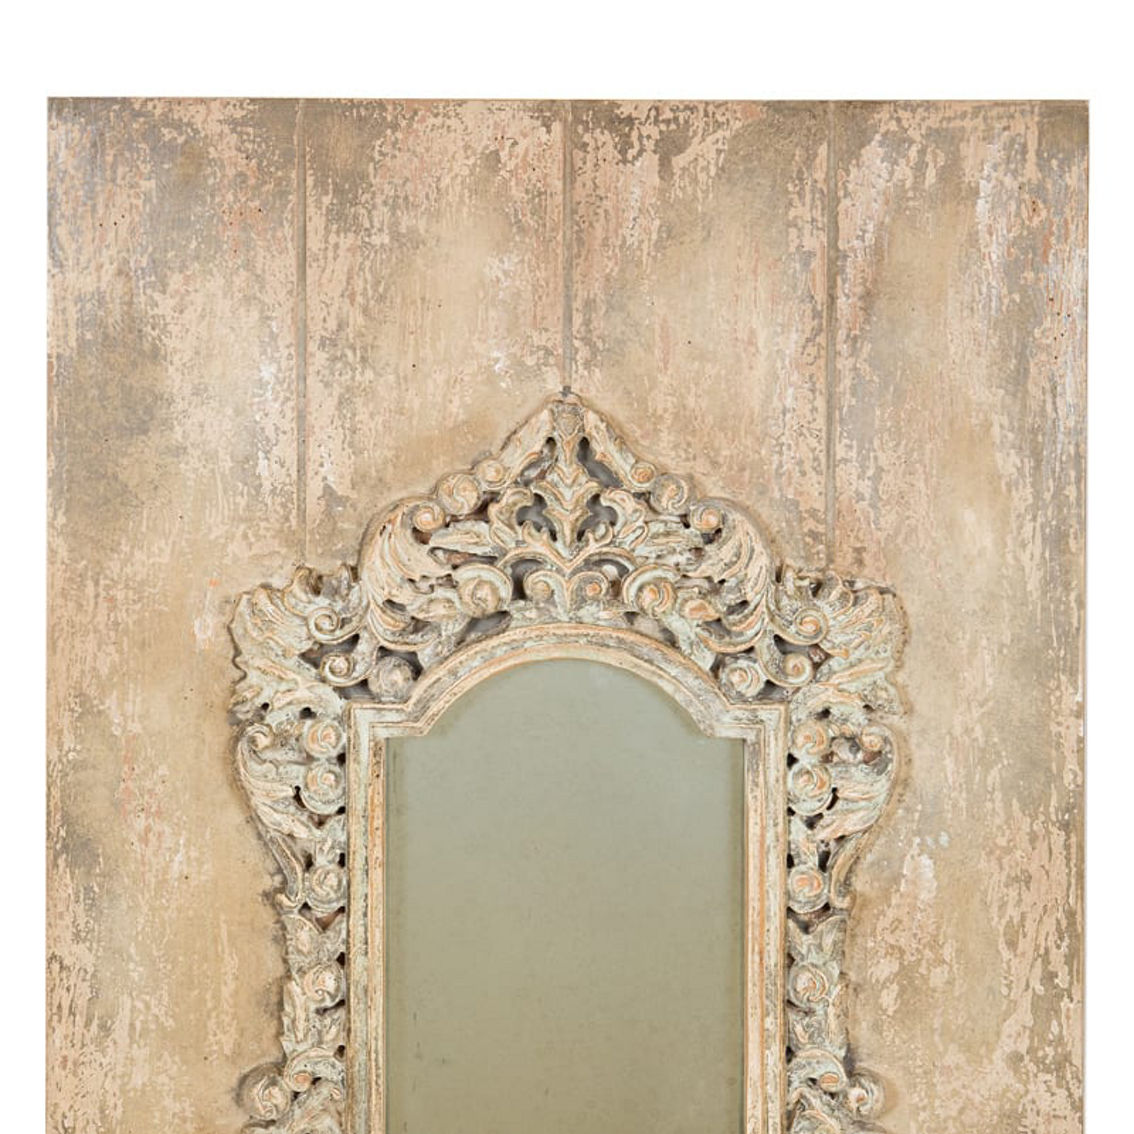 Manor Luxe Marseille Baroque Wood & Antiqued Glass Wall Mirror 24''L x 36''H - Image 1 of 2